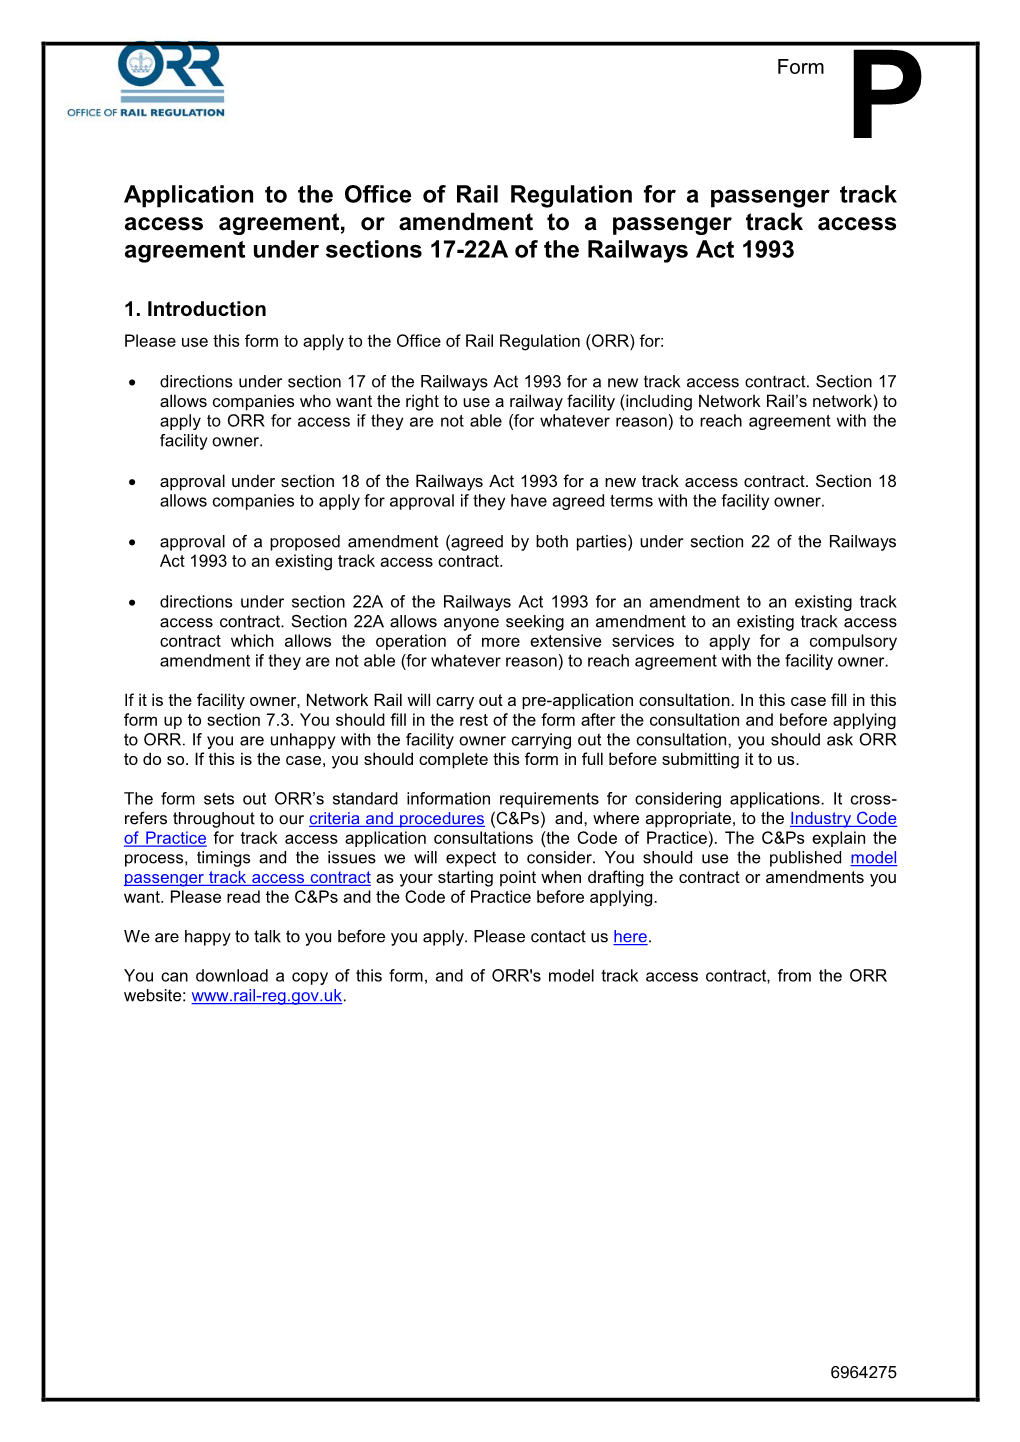 FIRST CAPITAL CONNECT LIMITED Relating to the Track Access Contract (Passenger Services) Dated 09 February 2006